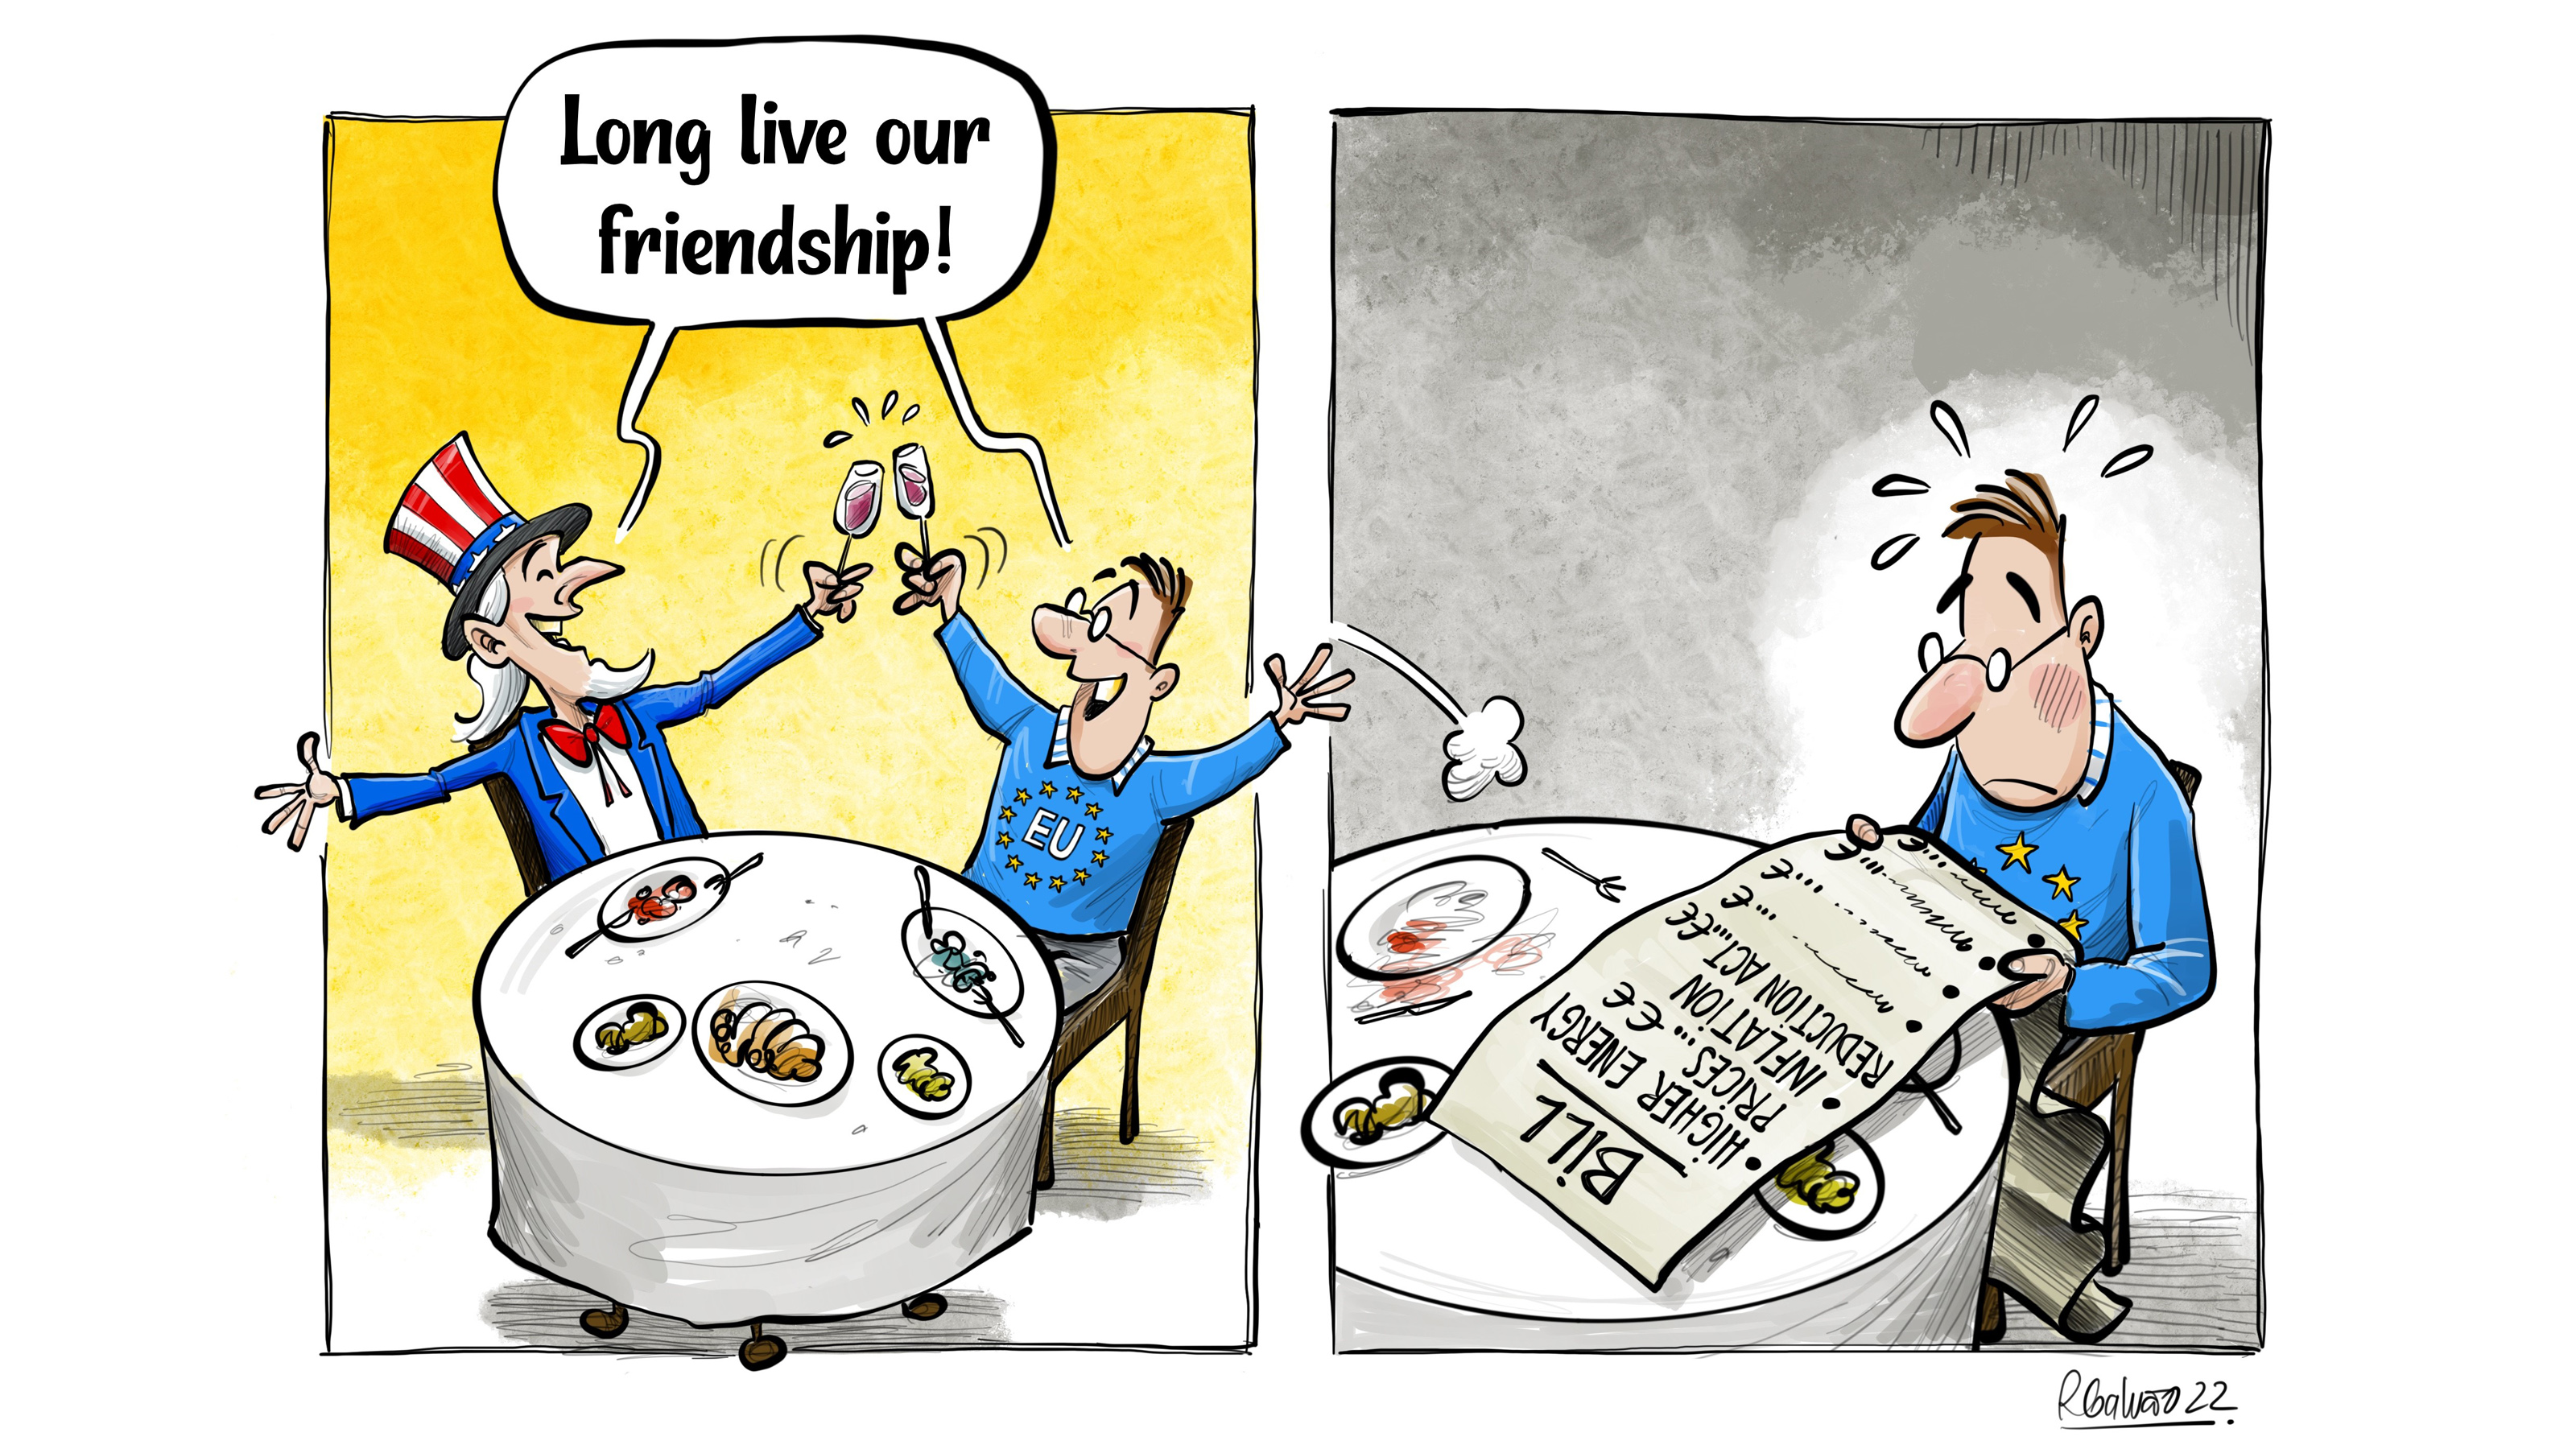 A costly friendship